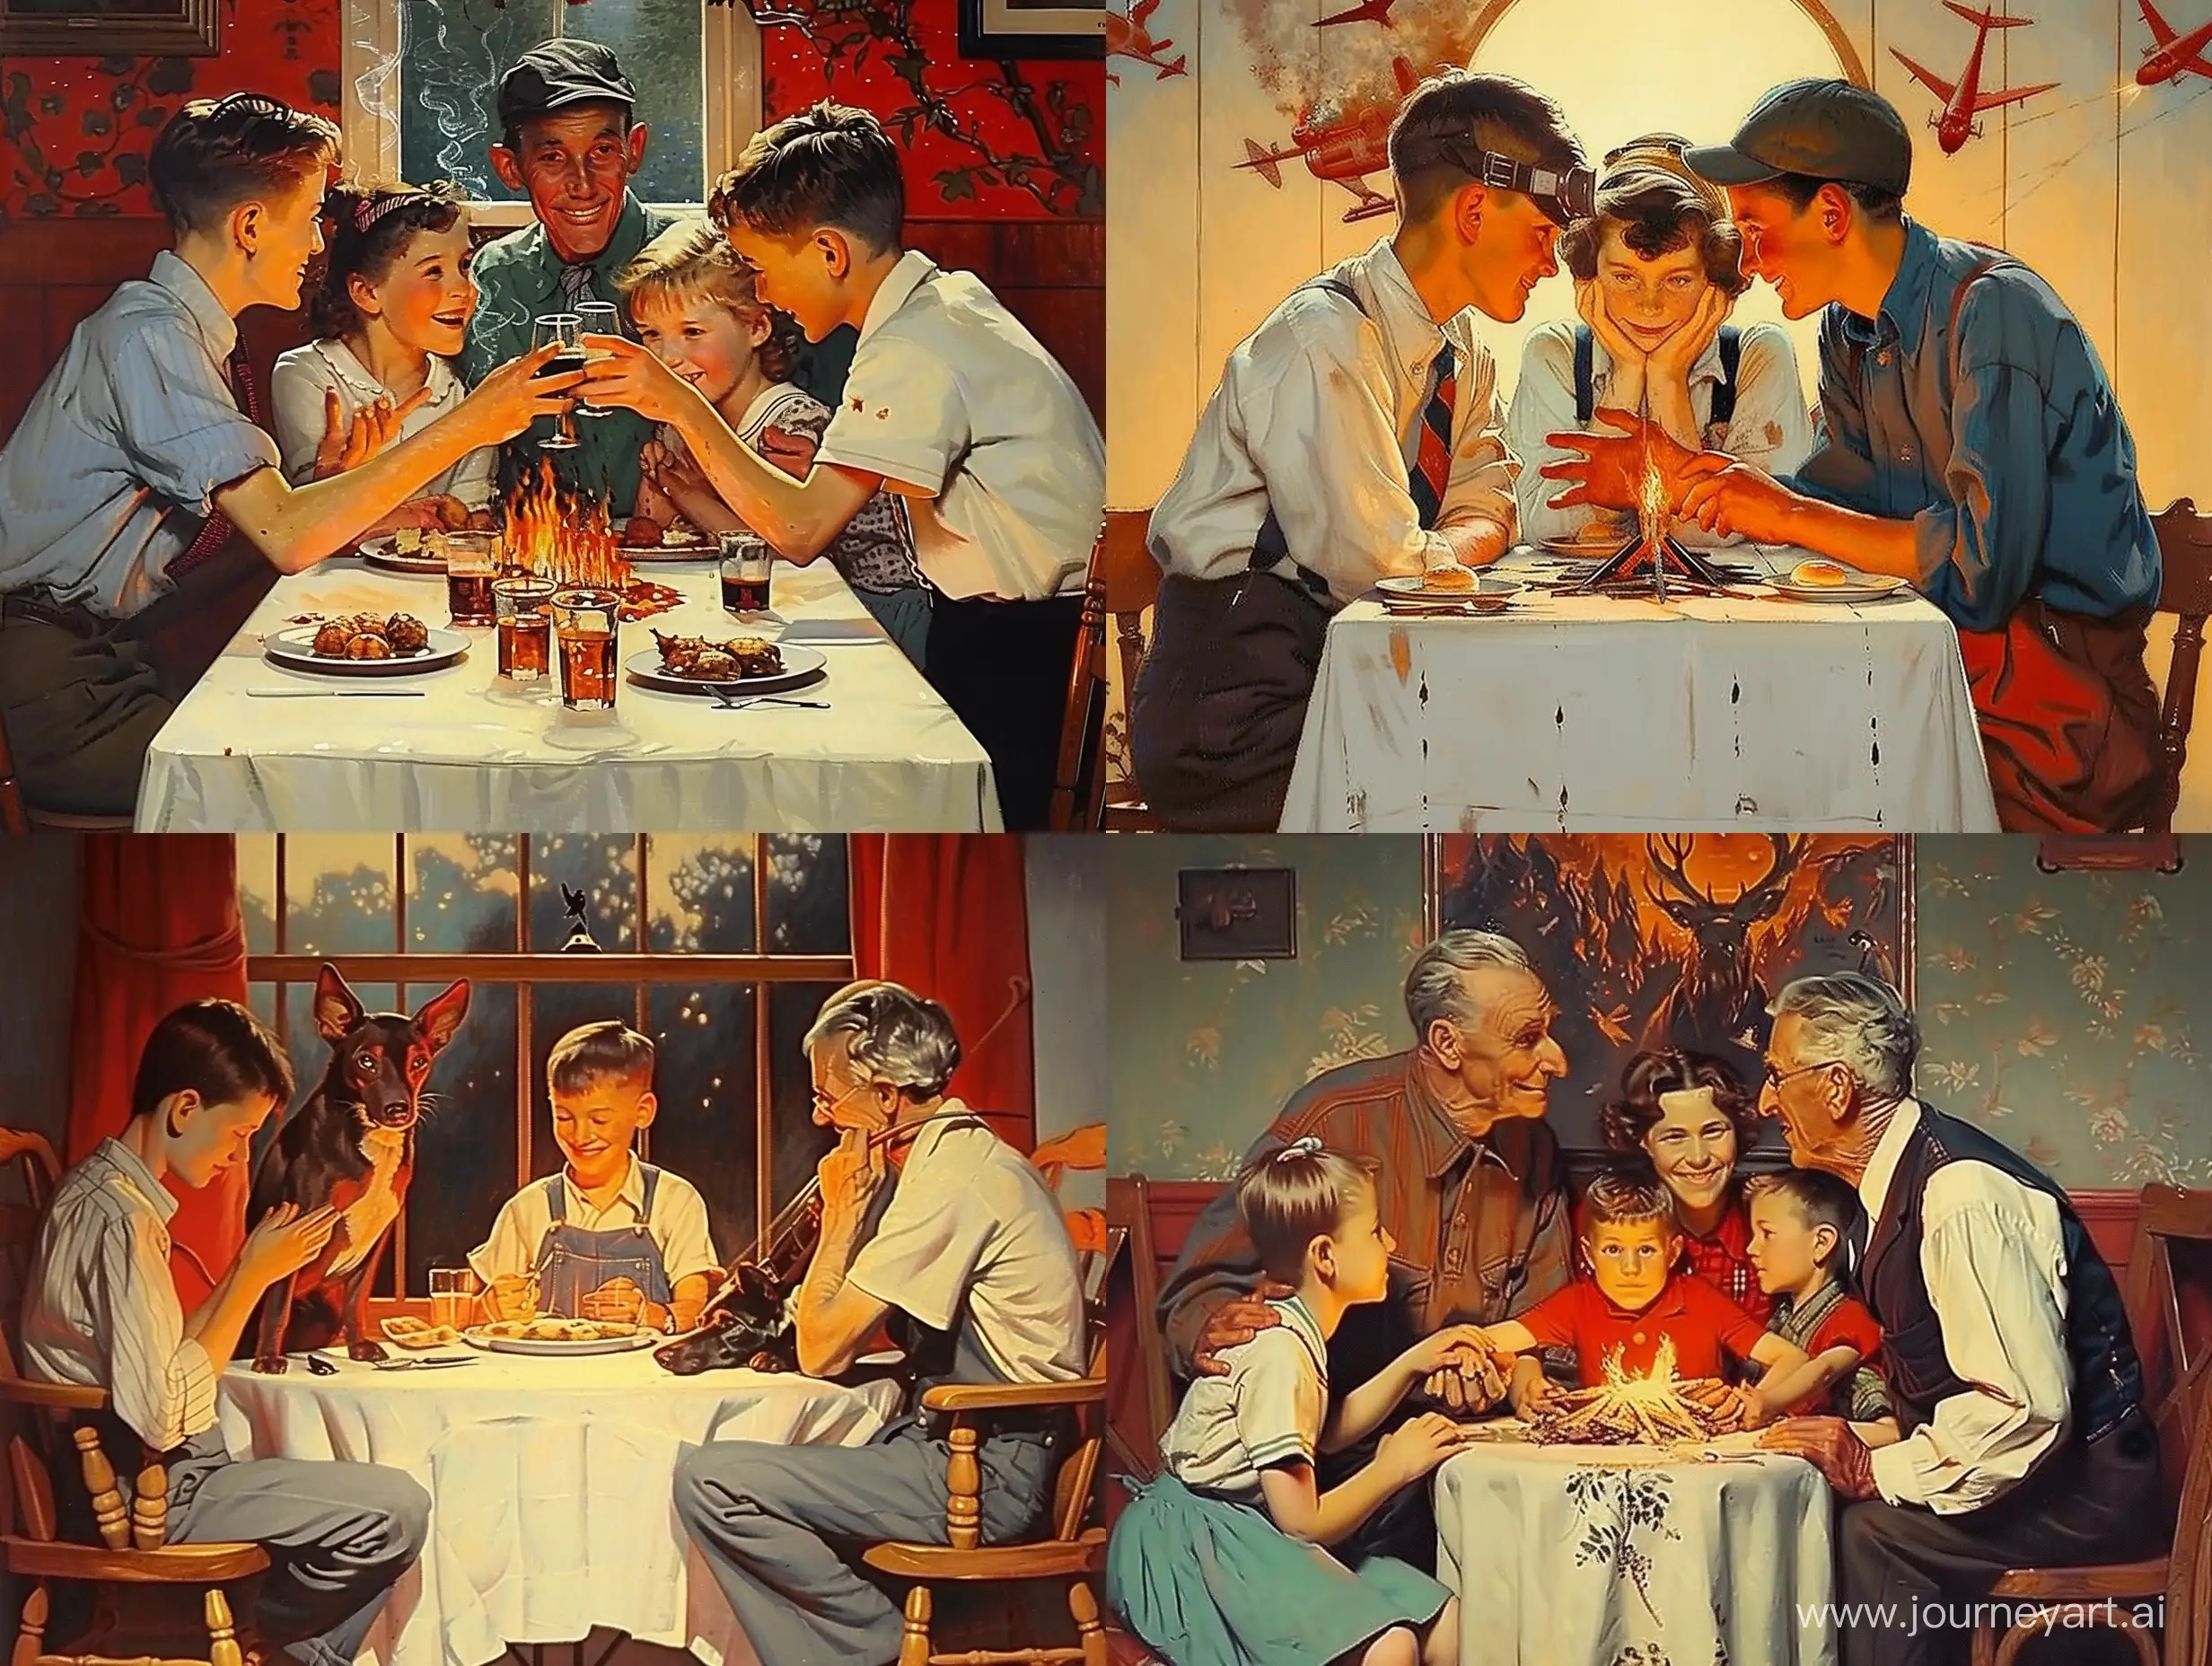 https://i.ibb.co/7vnNVFL/IMG-1132.jpg in the style of Norman Rockwell 